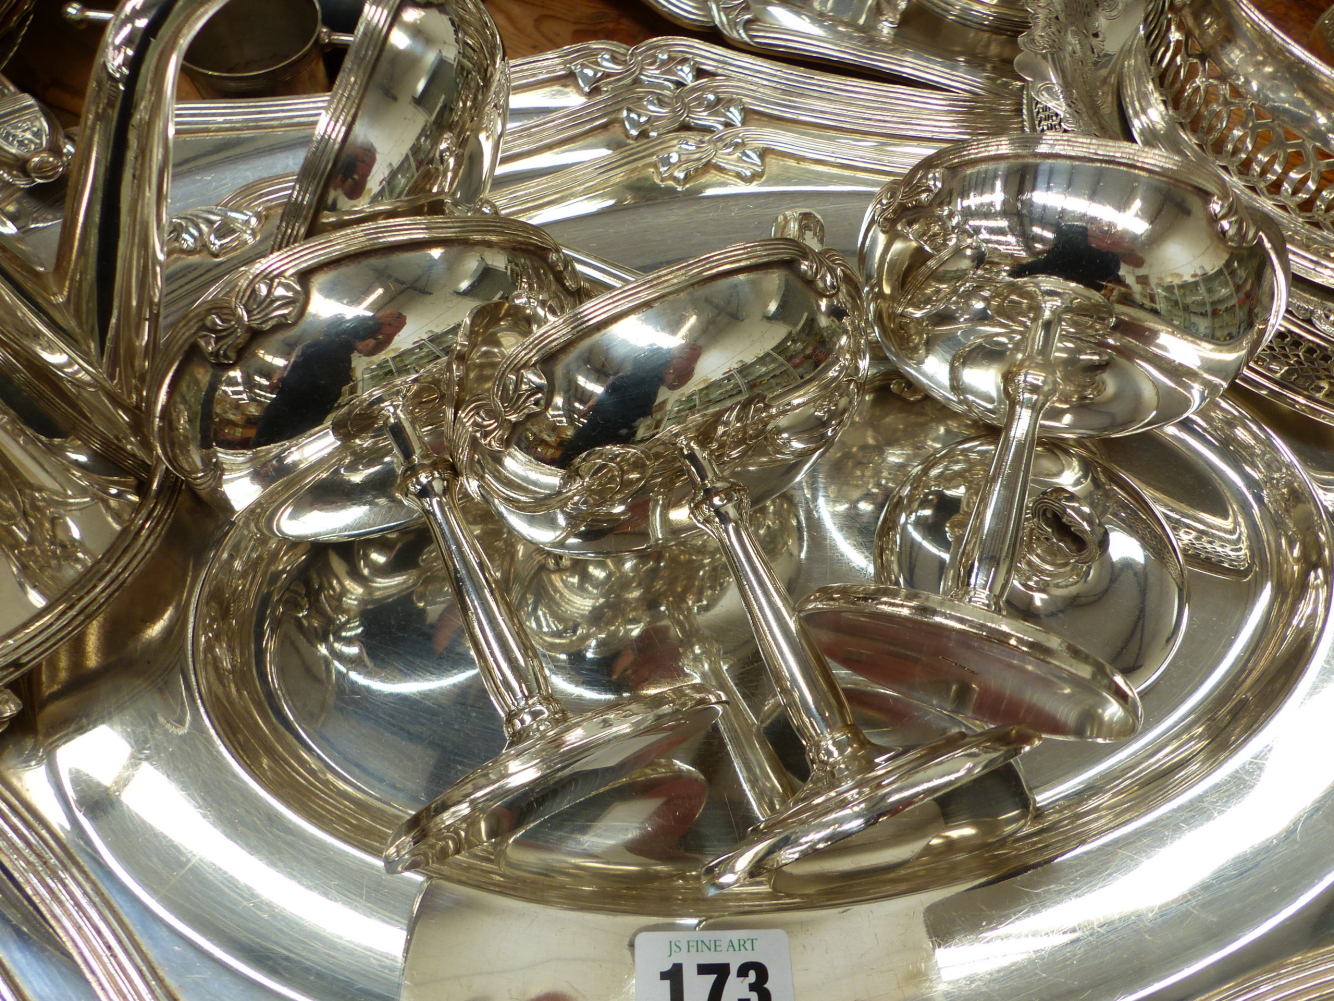 A GOOD COLLECTION OF SILVER PLATED WARES, TO INCLUDE SIGNED PIECES BY FRACALANZA, CHAMPAGNE SAUCERS, - Image 3 of 10